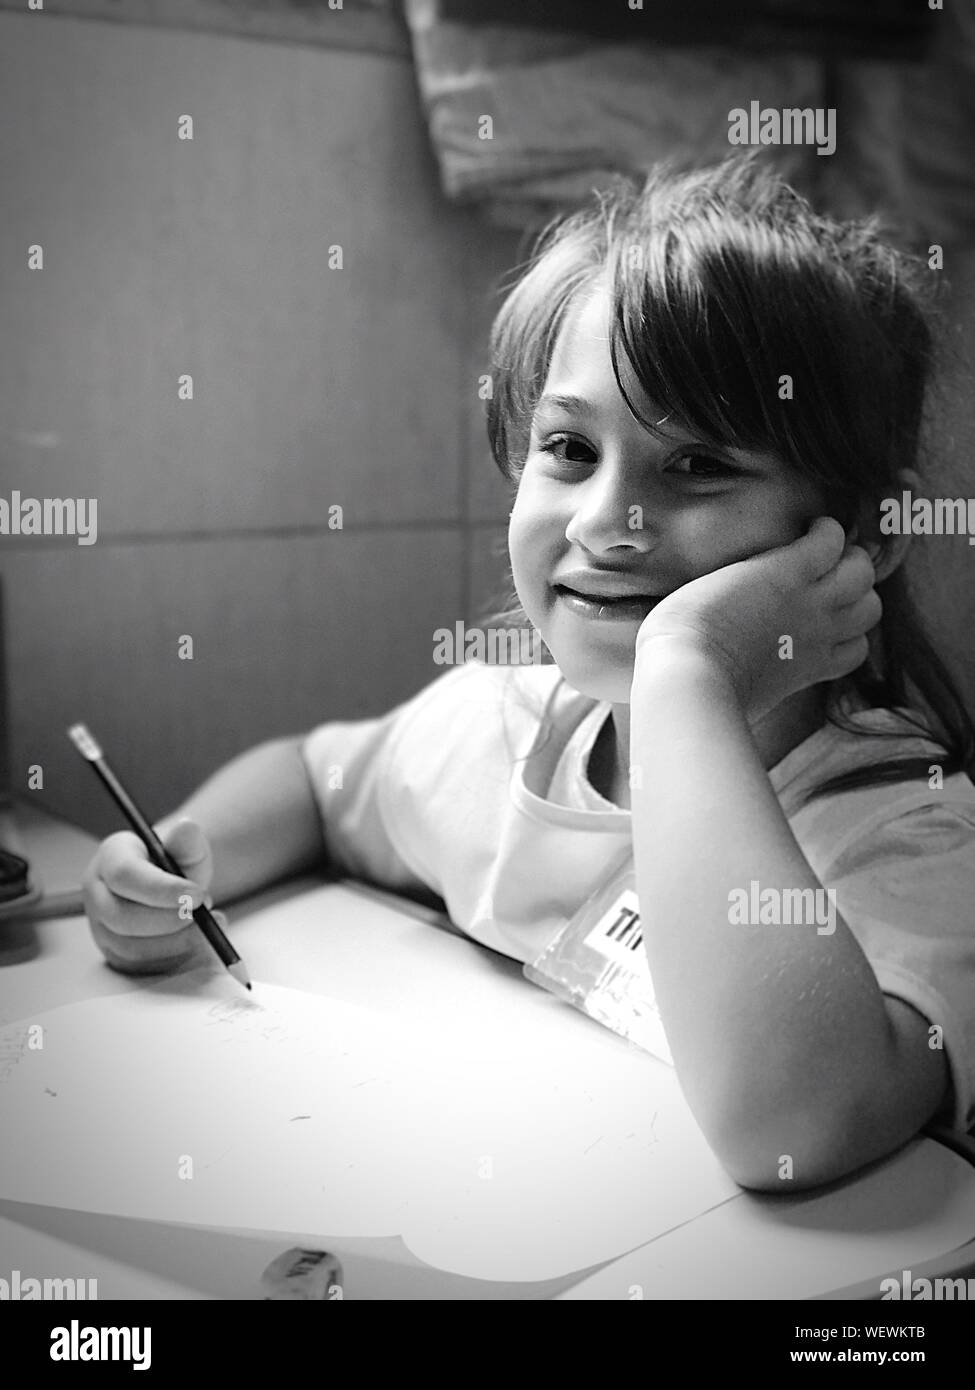 Close-up Portrait Of Smiling Girl Drawing At Table Banque D'Images